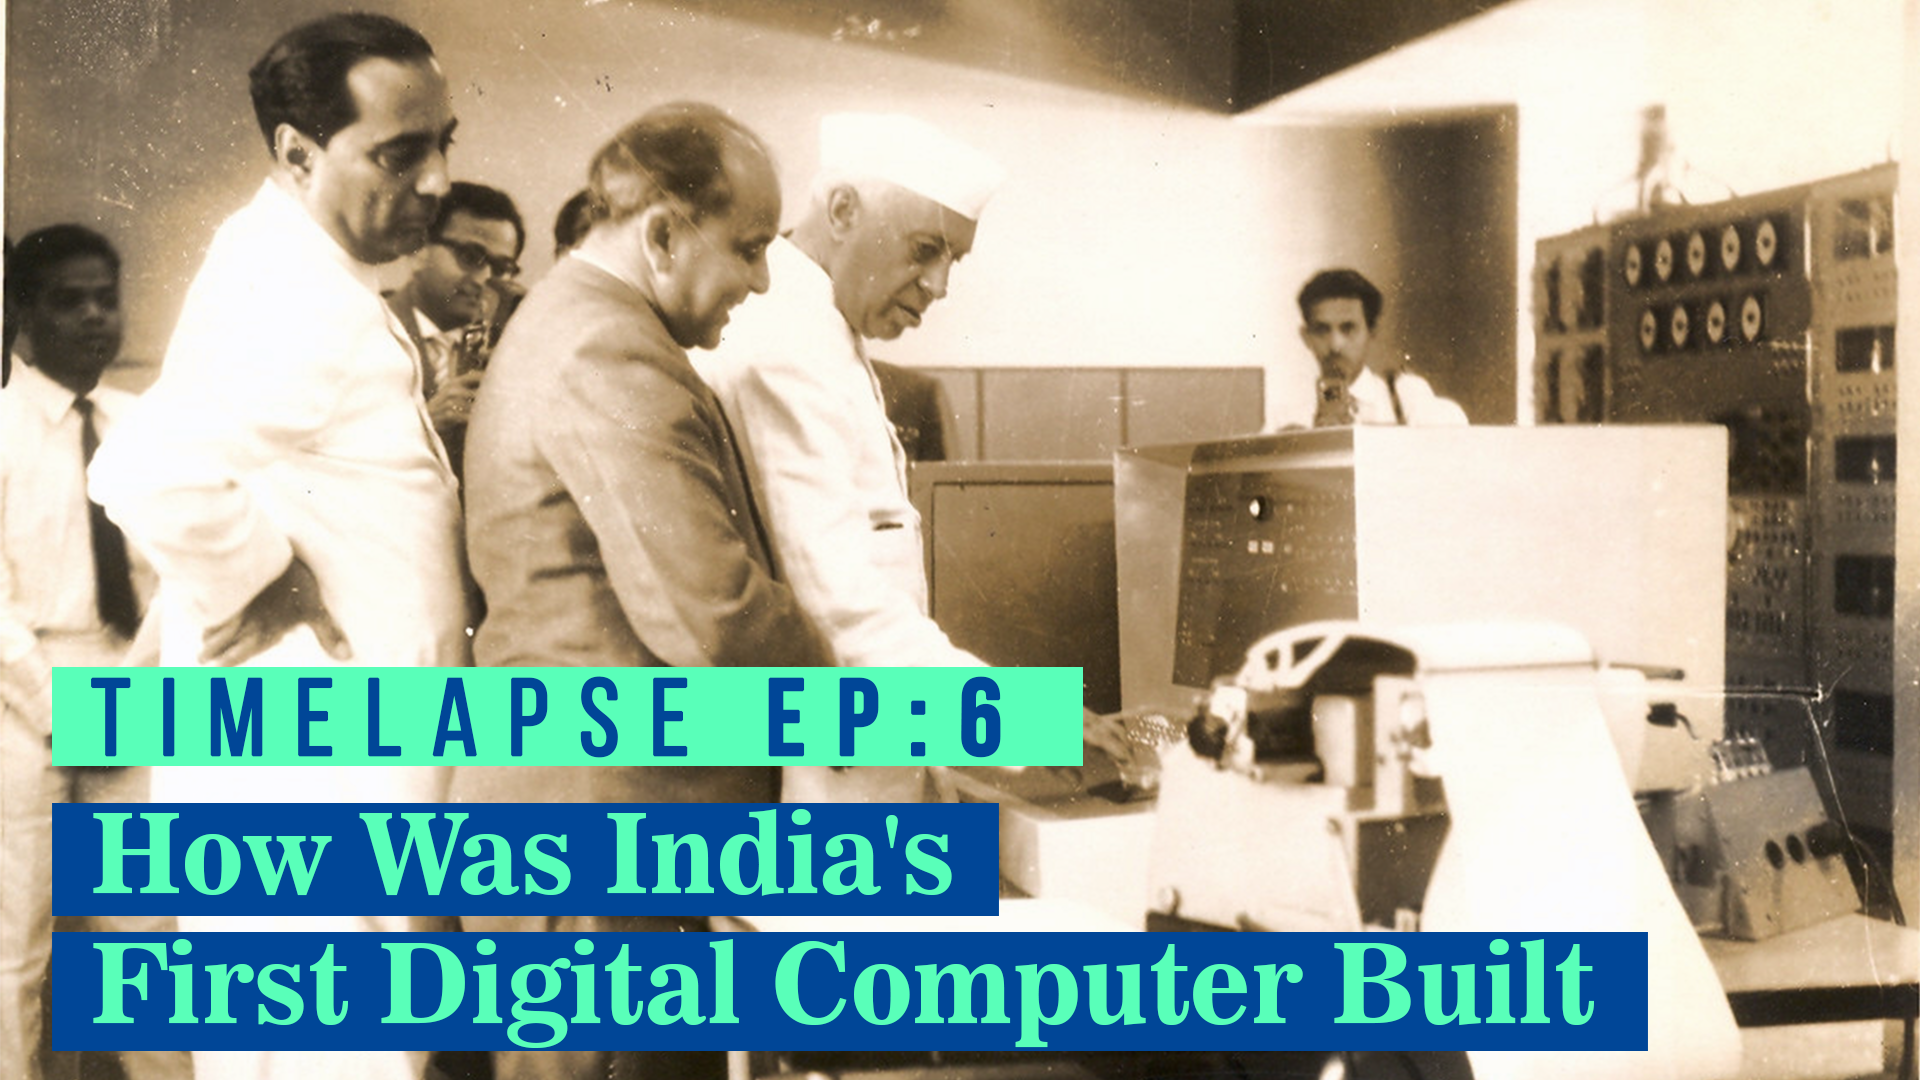 Video: TimeLapse- How Was India’s First Digital Computer Built